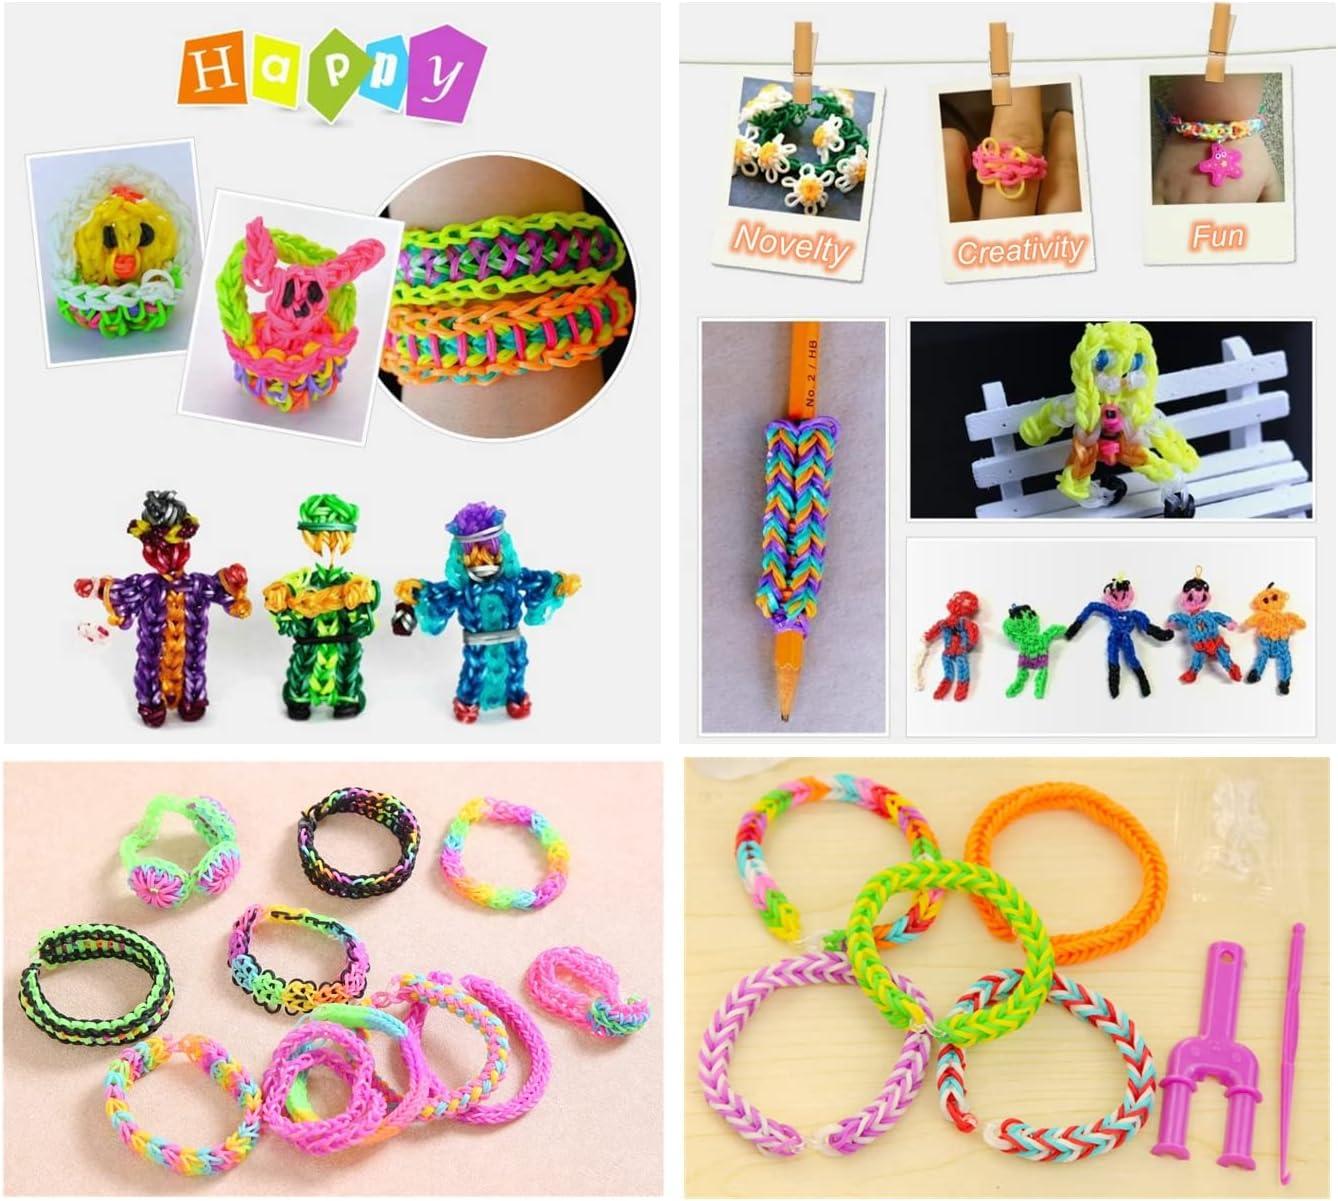 Loom Rubber Band Bracelets kit for Girls, Boys - 1500 + DIY Colored Rubber  Bands, Skin-Friendly - Birthday, Friendship Gift for Anyone.